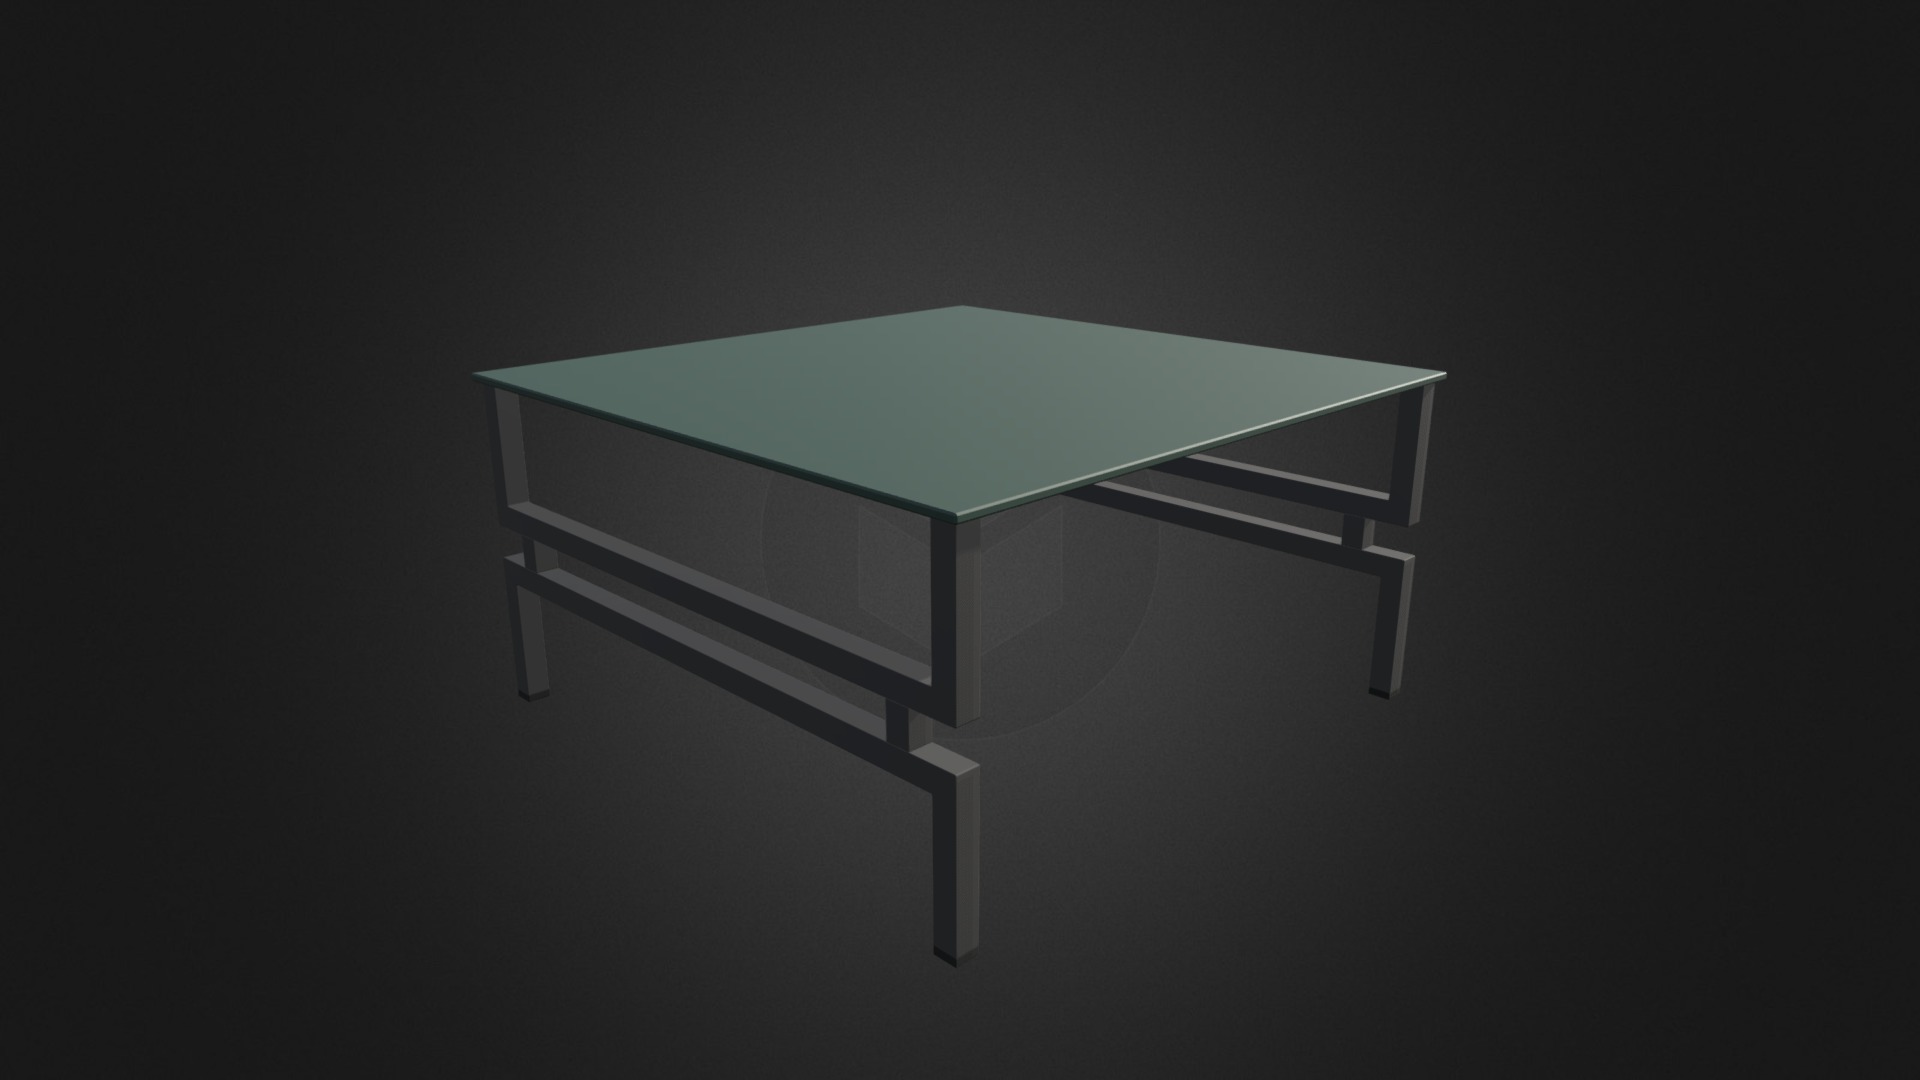 3D model Square Glass Coffe Table - This is a 3D model of the Square Glass Coffe Table. The 3D model is about a table with a glass top.